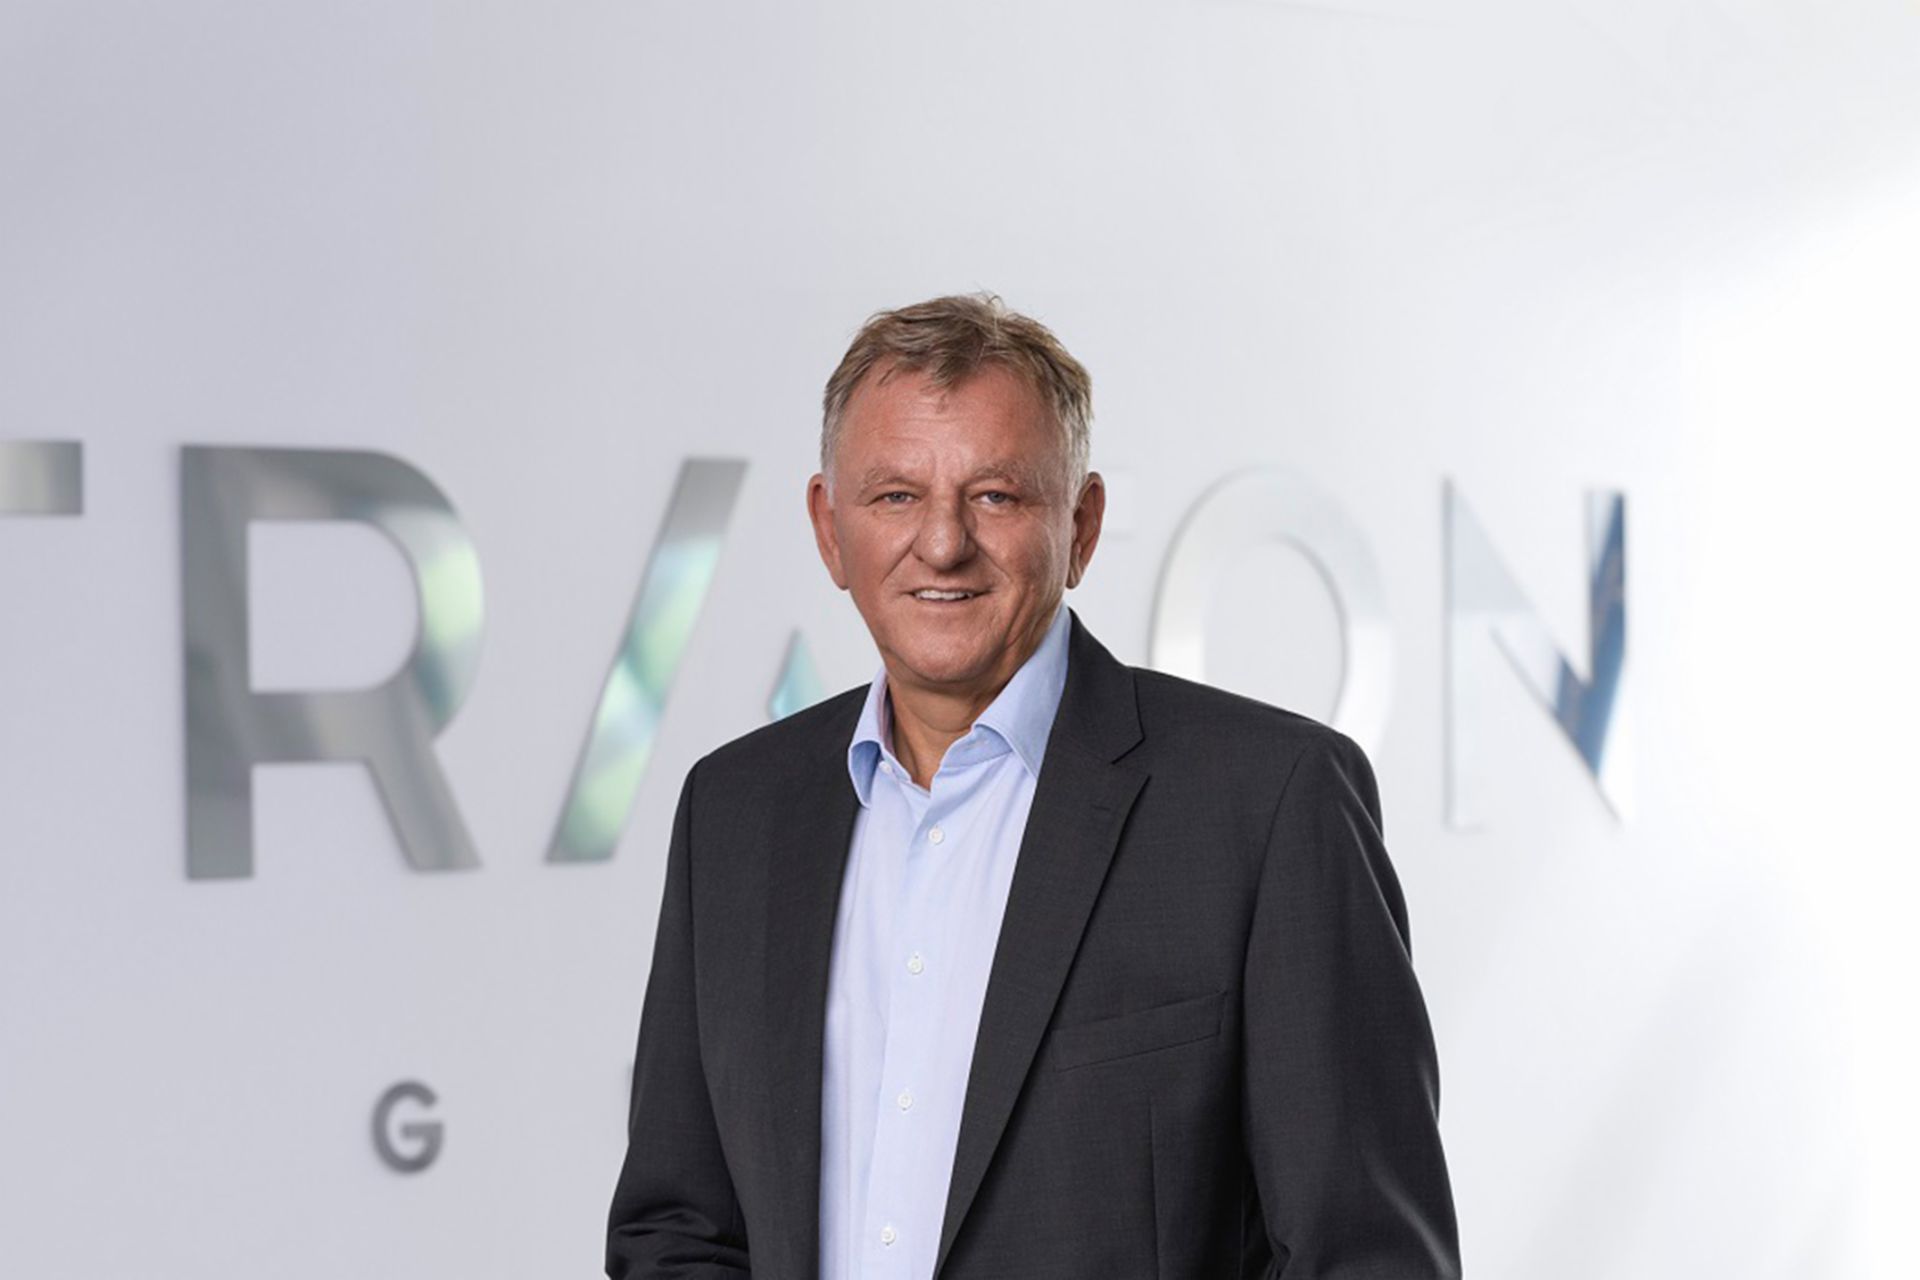 “We have done a good job,” said Andreas Renschler, CEO of TRATON AG in regards to the deliveries of commercial vehicle in the first three quarters of 2018.
                 